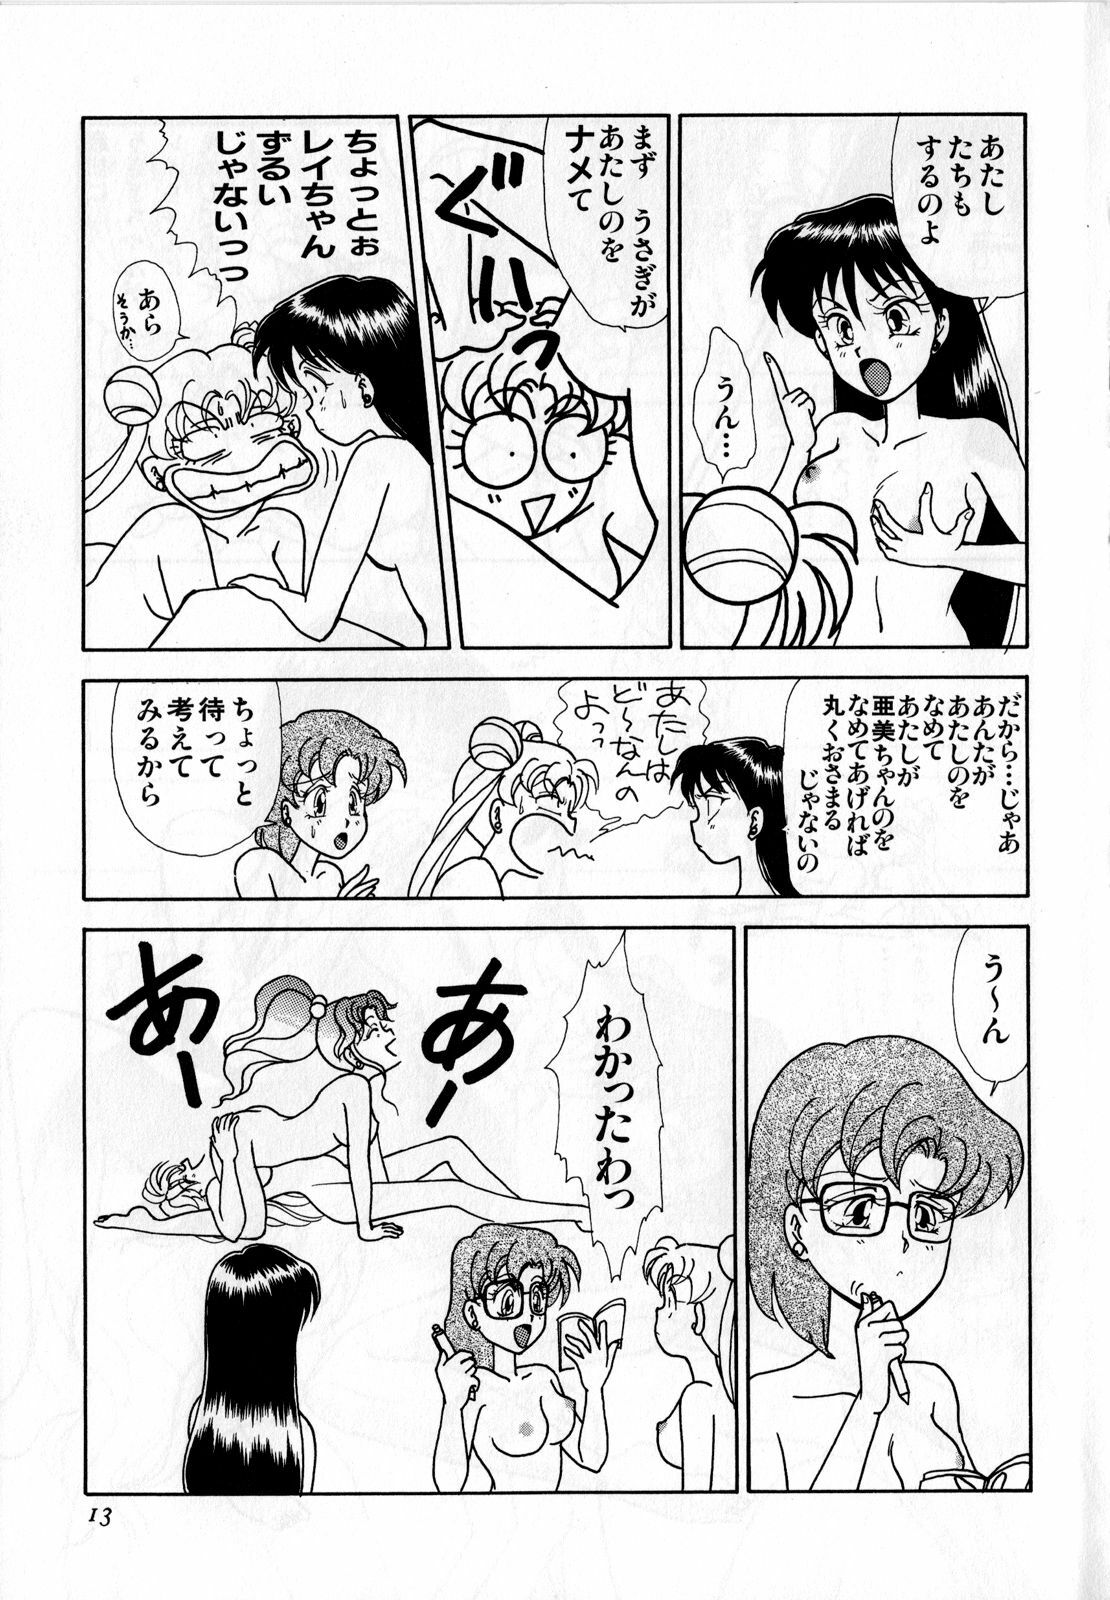 [Anthology] Lunatic Party 3 (Sailor Moon) page 14 full